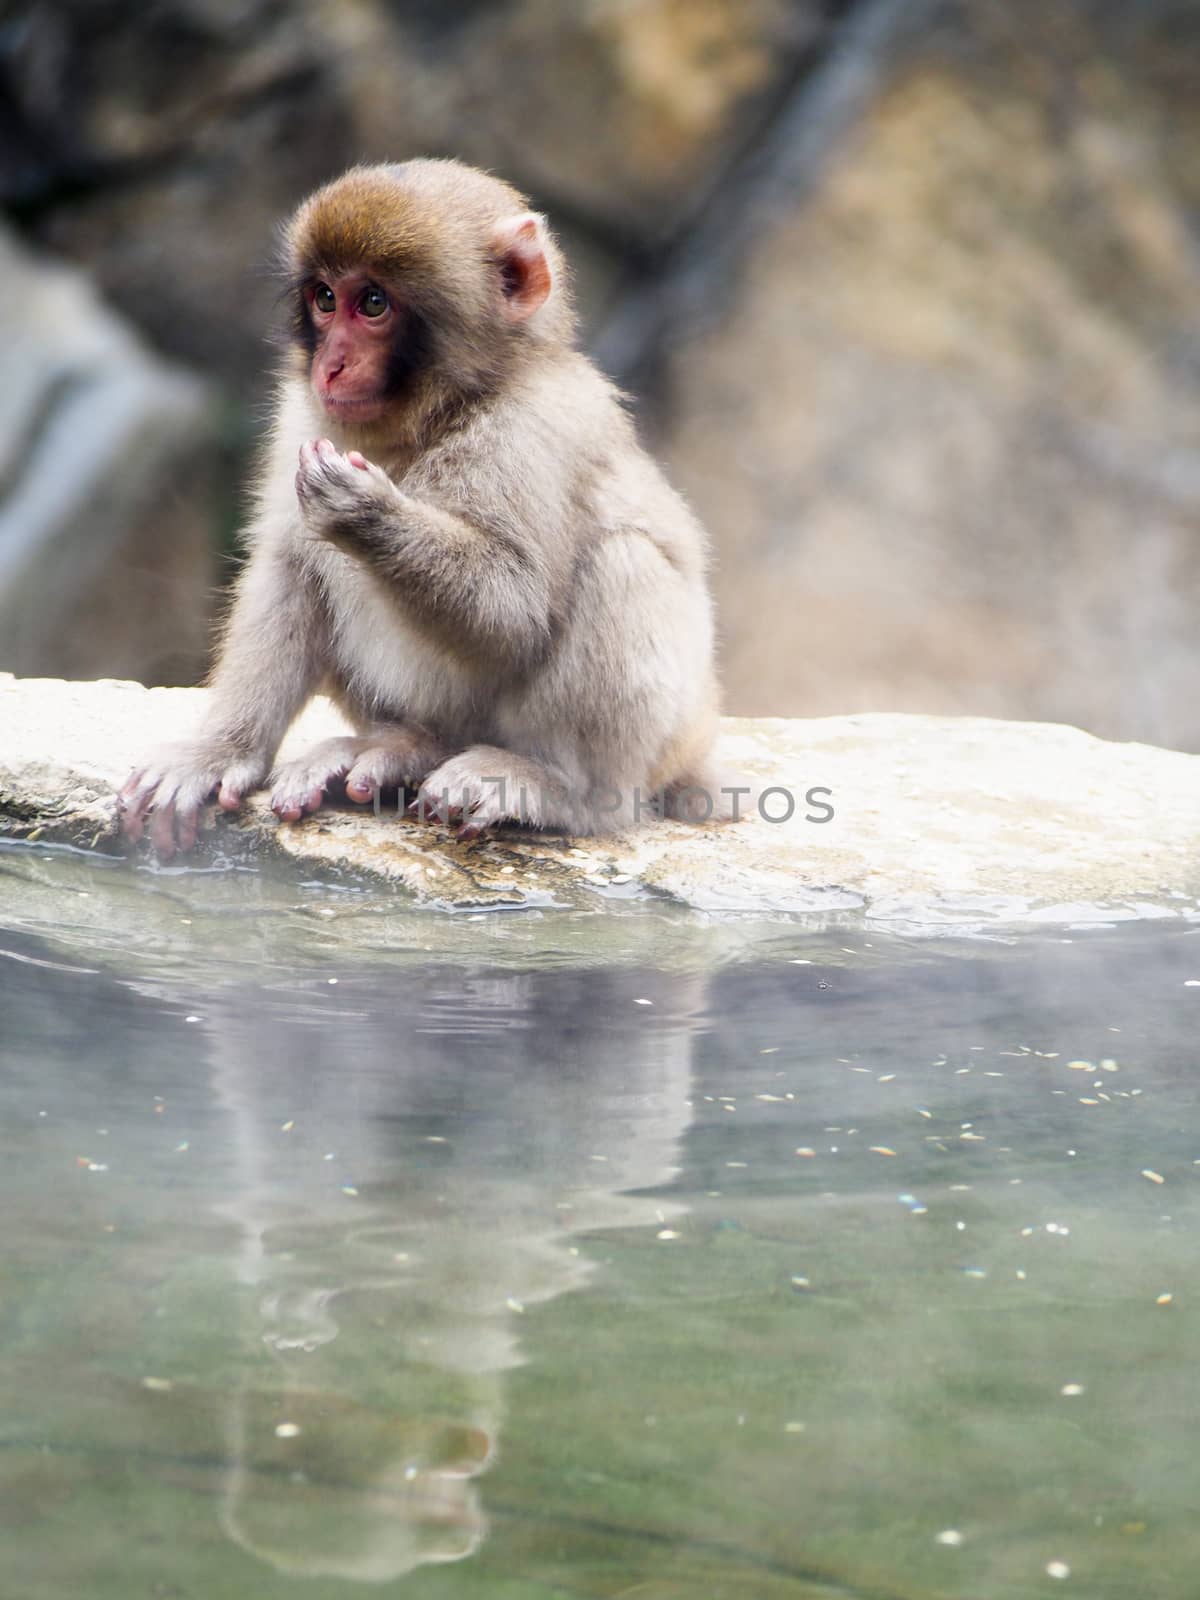 Japanese Macaque or Snow Monkey by NikkiGensert